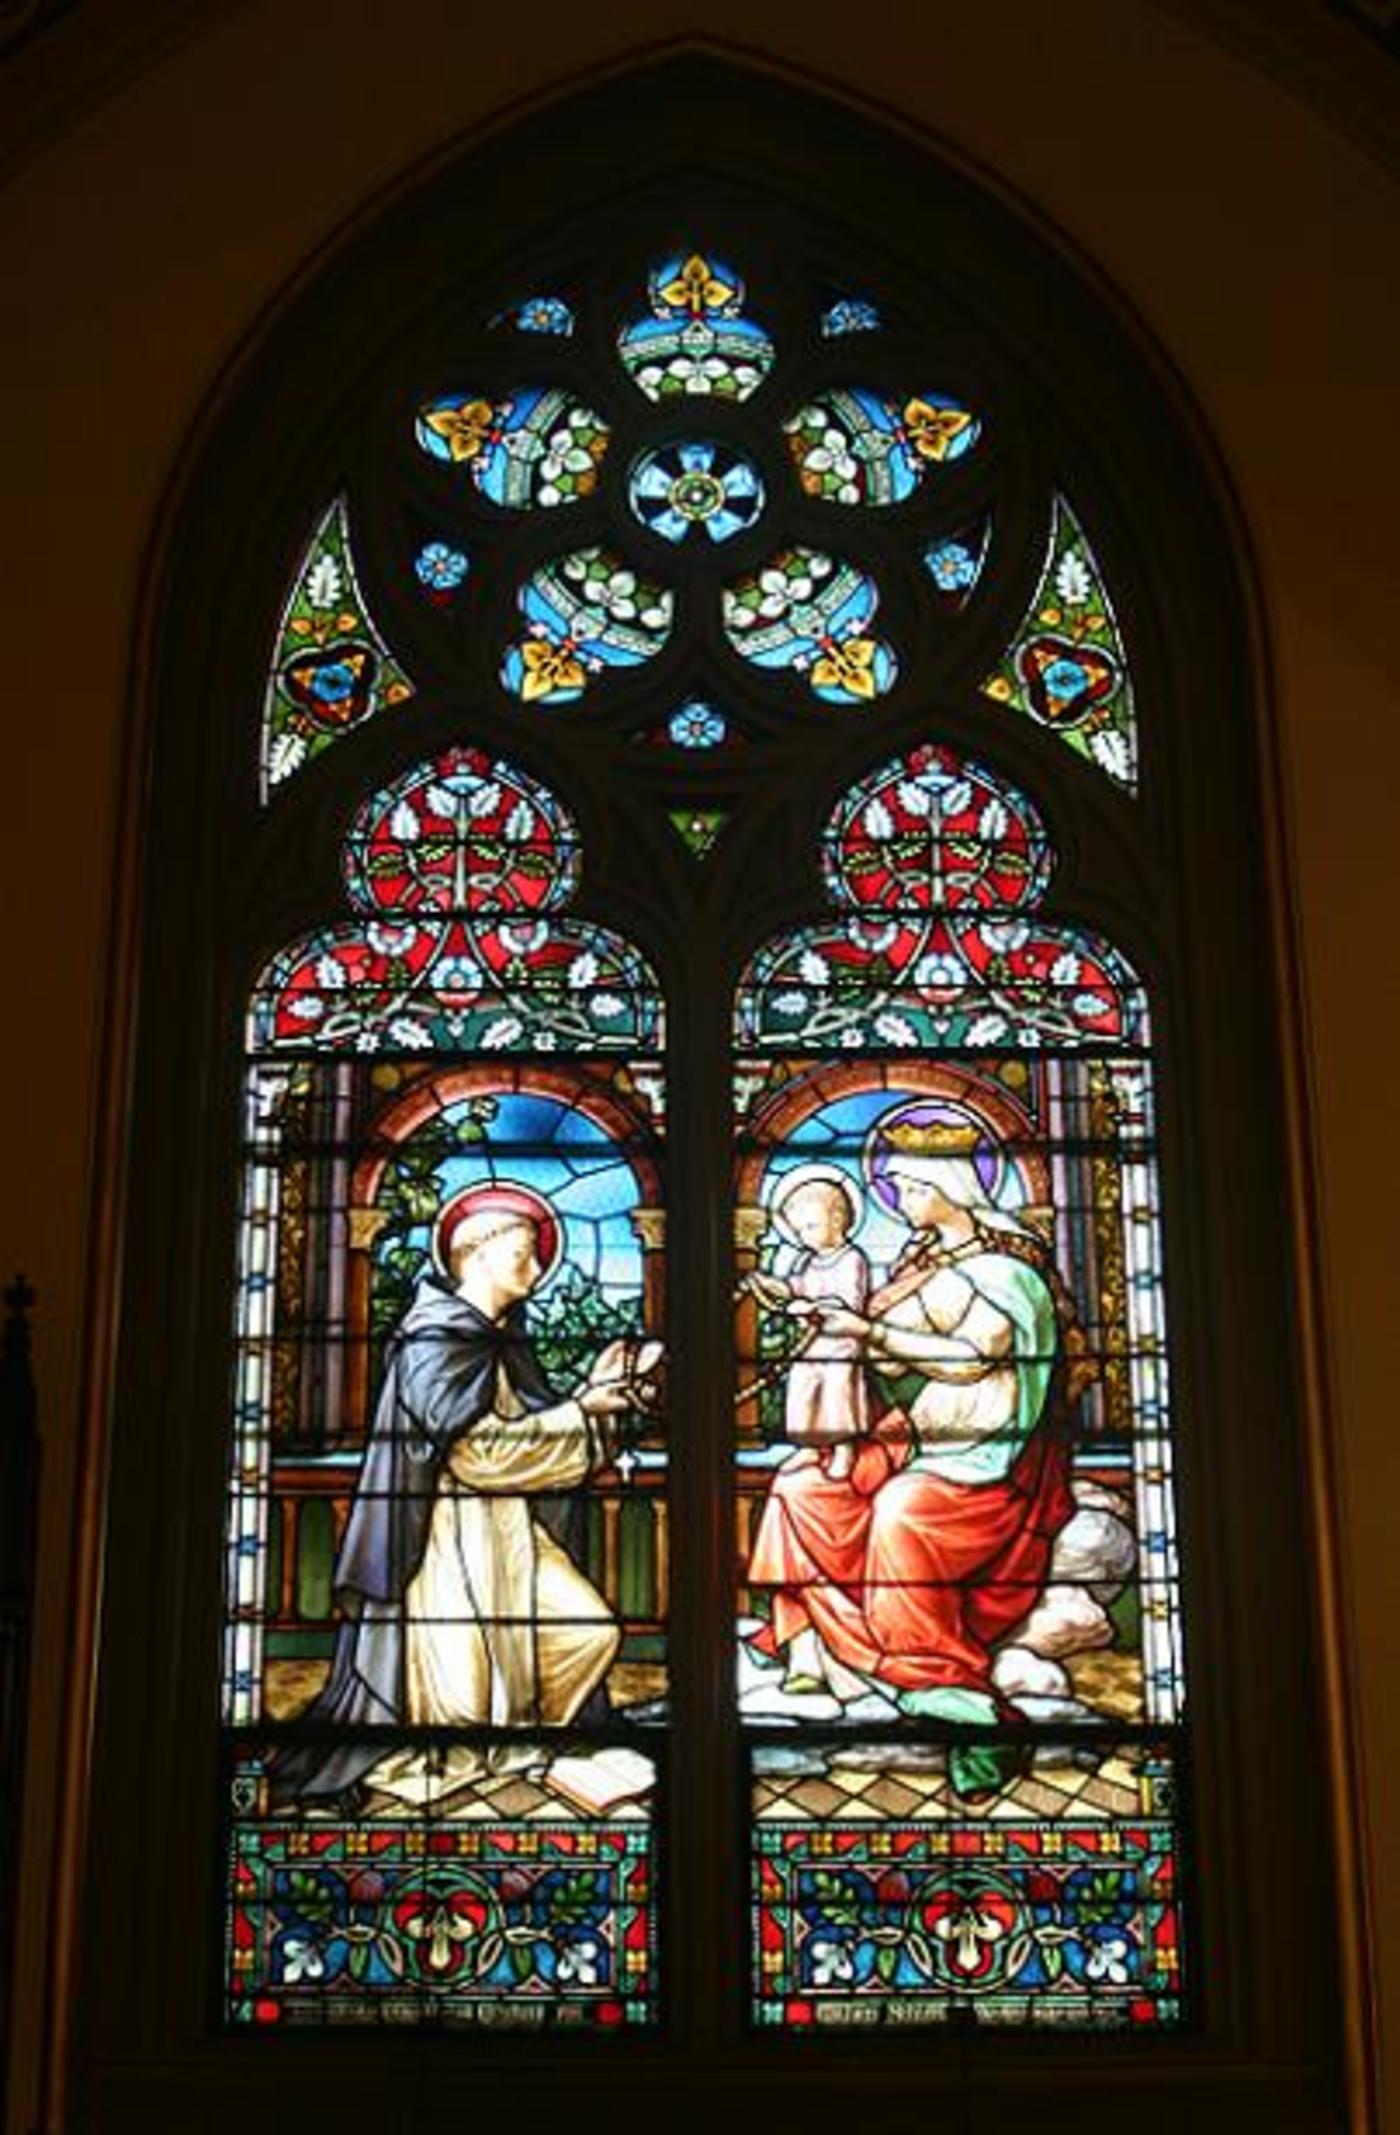 Windows 7A and 7B: Blessed Virgin Mary, Infant Jesus and St. Dominic